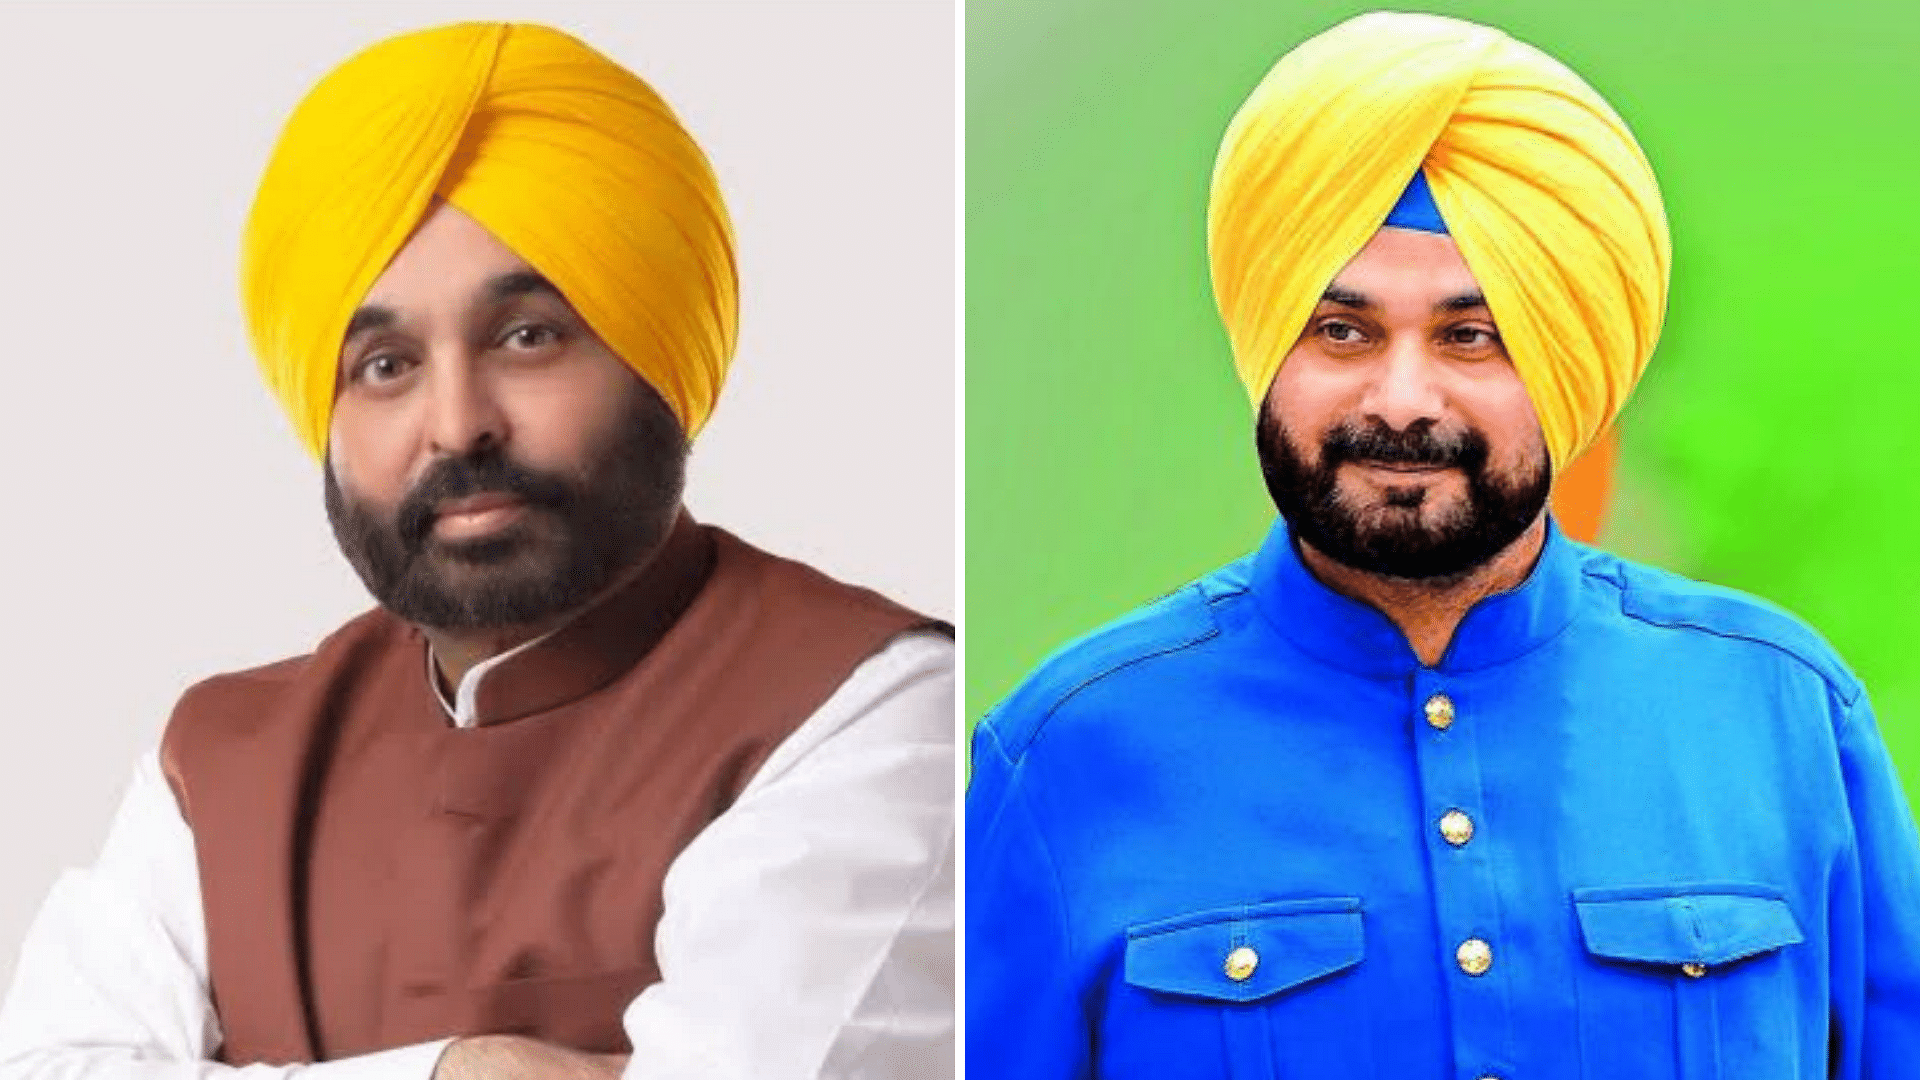 <div class="paragraphs"><p>Punjab Congress leader <a href="https://www.thequint.com/topic/navjot-singh-sidhu">Navjot Singh Sidhu</a> on Monday, 9 May, met <a href="https://www.thequint.com/topic/punjab-elections">Punjab</a> Chief Minister Bhagwant Mann and said that the Aam Aadmi Party (AAP) leader was not arrogant but "very receptive" unlike the former chief ministers.</p></div>